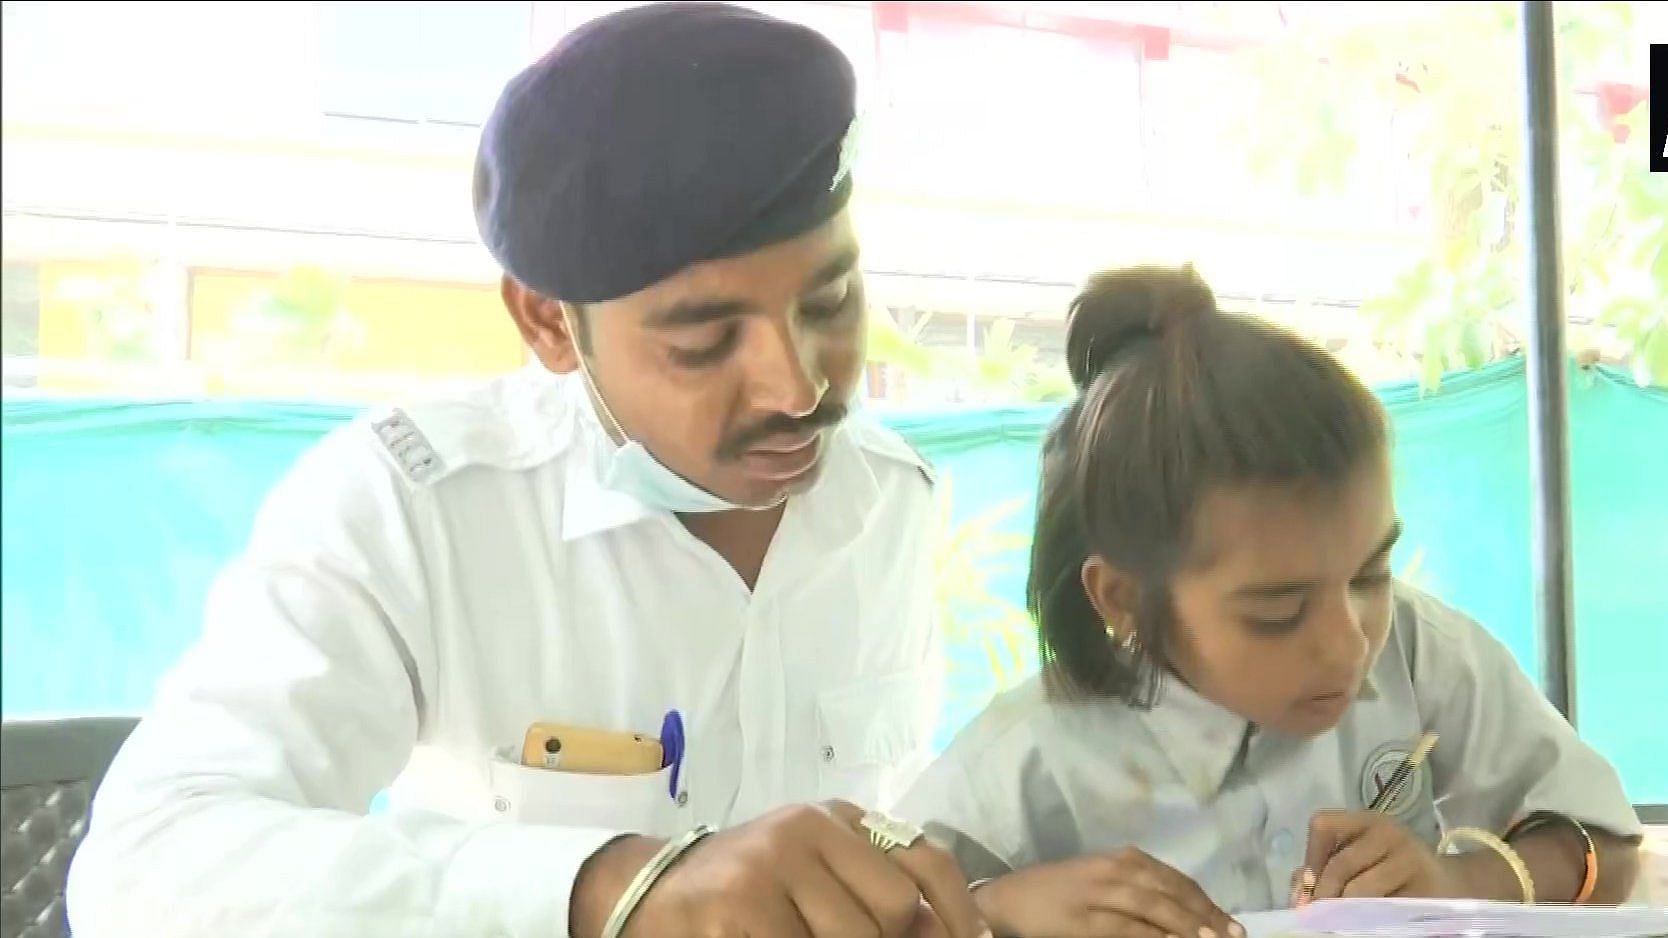 A traffic police personnel teaching his student.